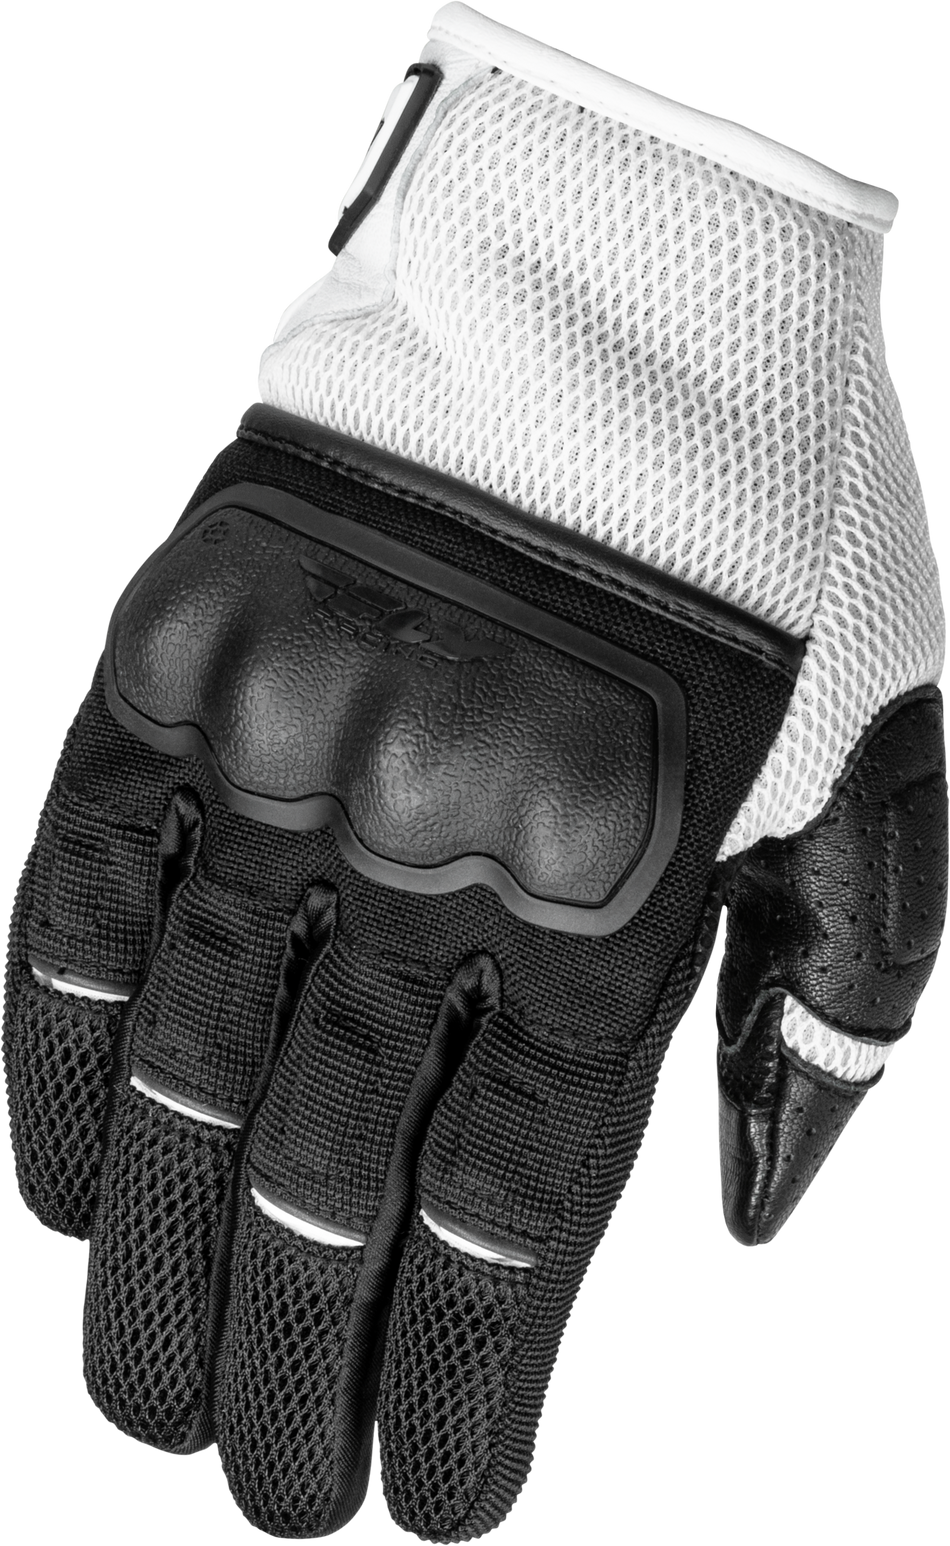 FLY RACING Women's Coolpro Force Gloves Black/White Md 476-6301M